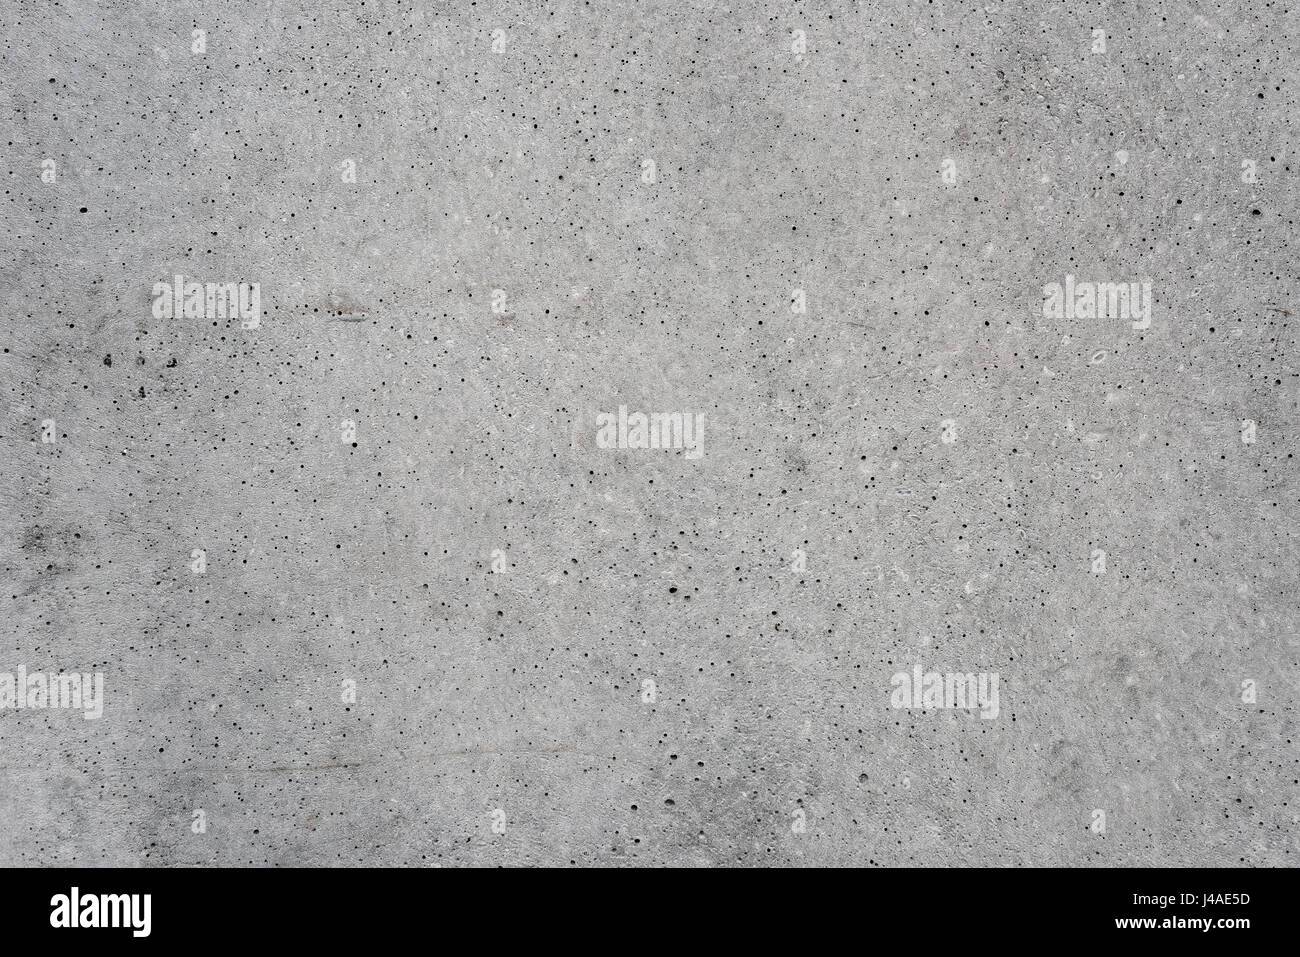 Flat concrete flooring surface texture as background Stock Photo